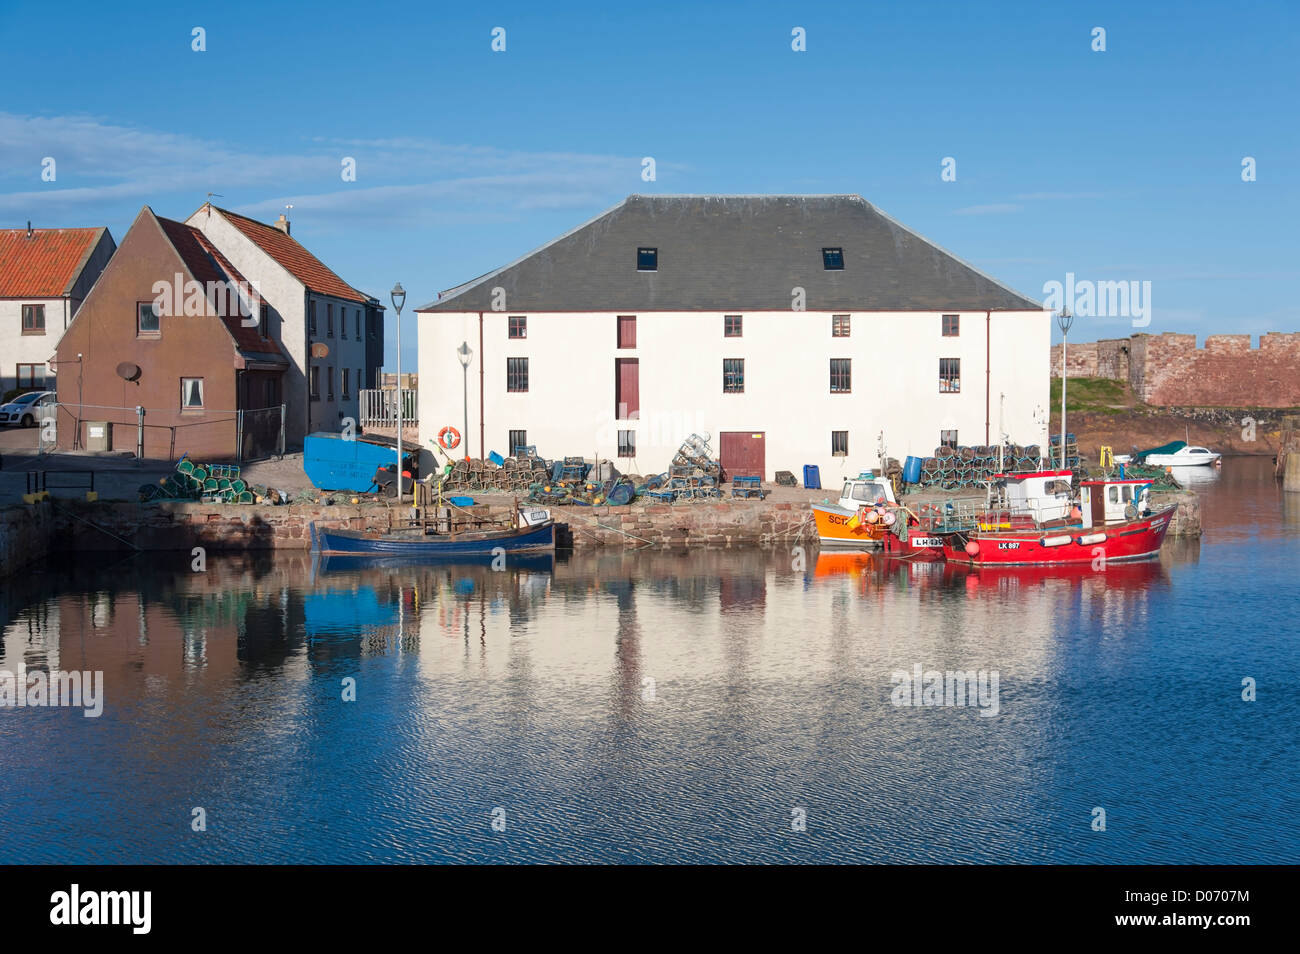 The renovated MacArthur's Store fisherman's store and warehouse in Dunbar, East Lothian, Scotland. Stock Photo